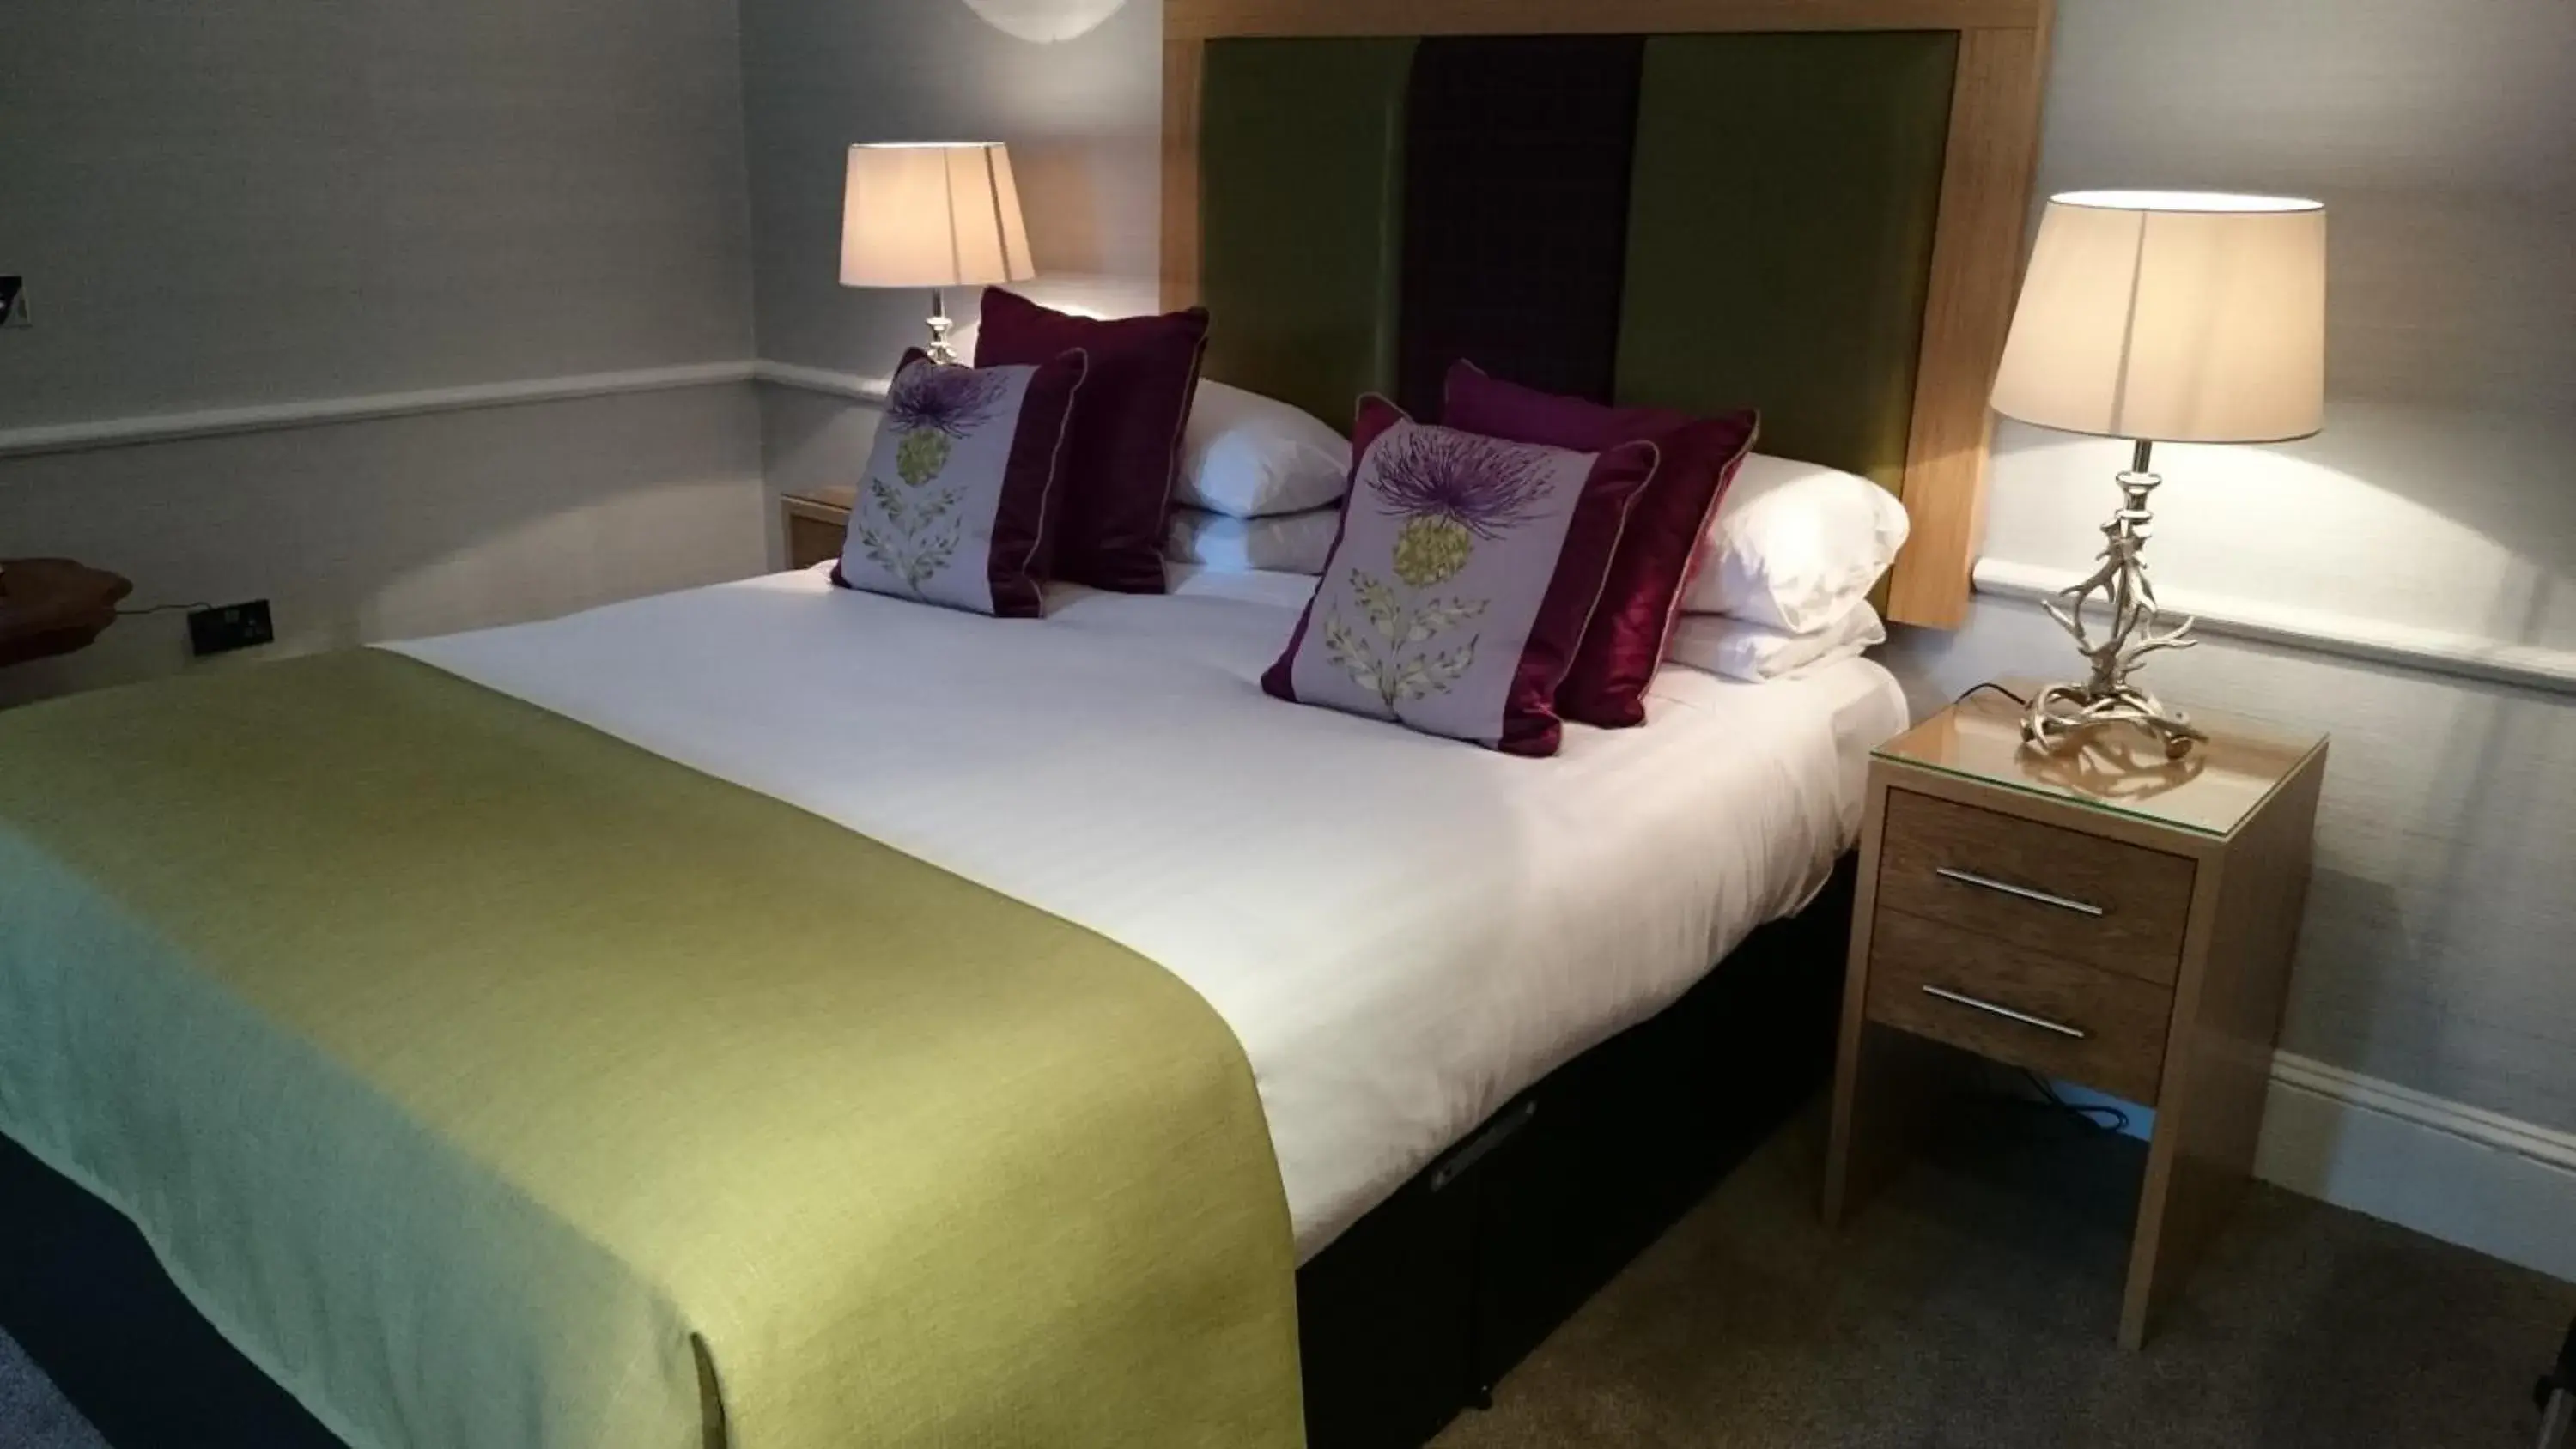 Bedroom, Room Photo in Craigmonie Hotel Inverness by Compass Hospitality